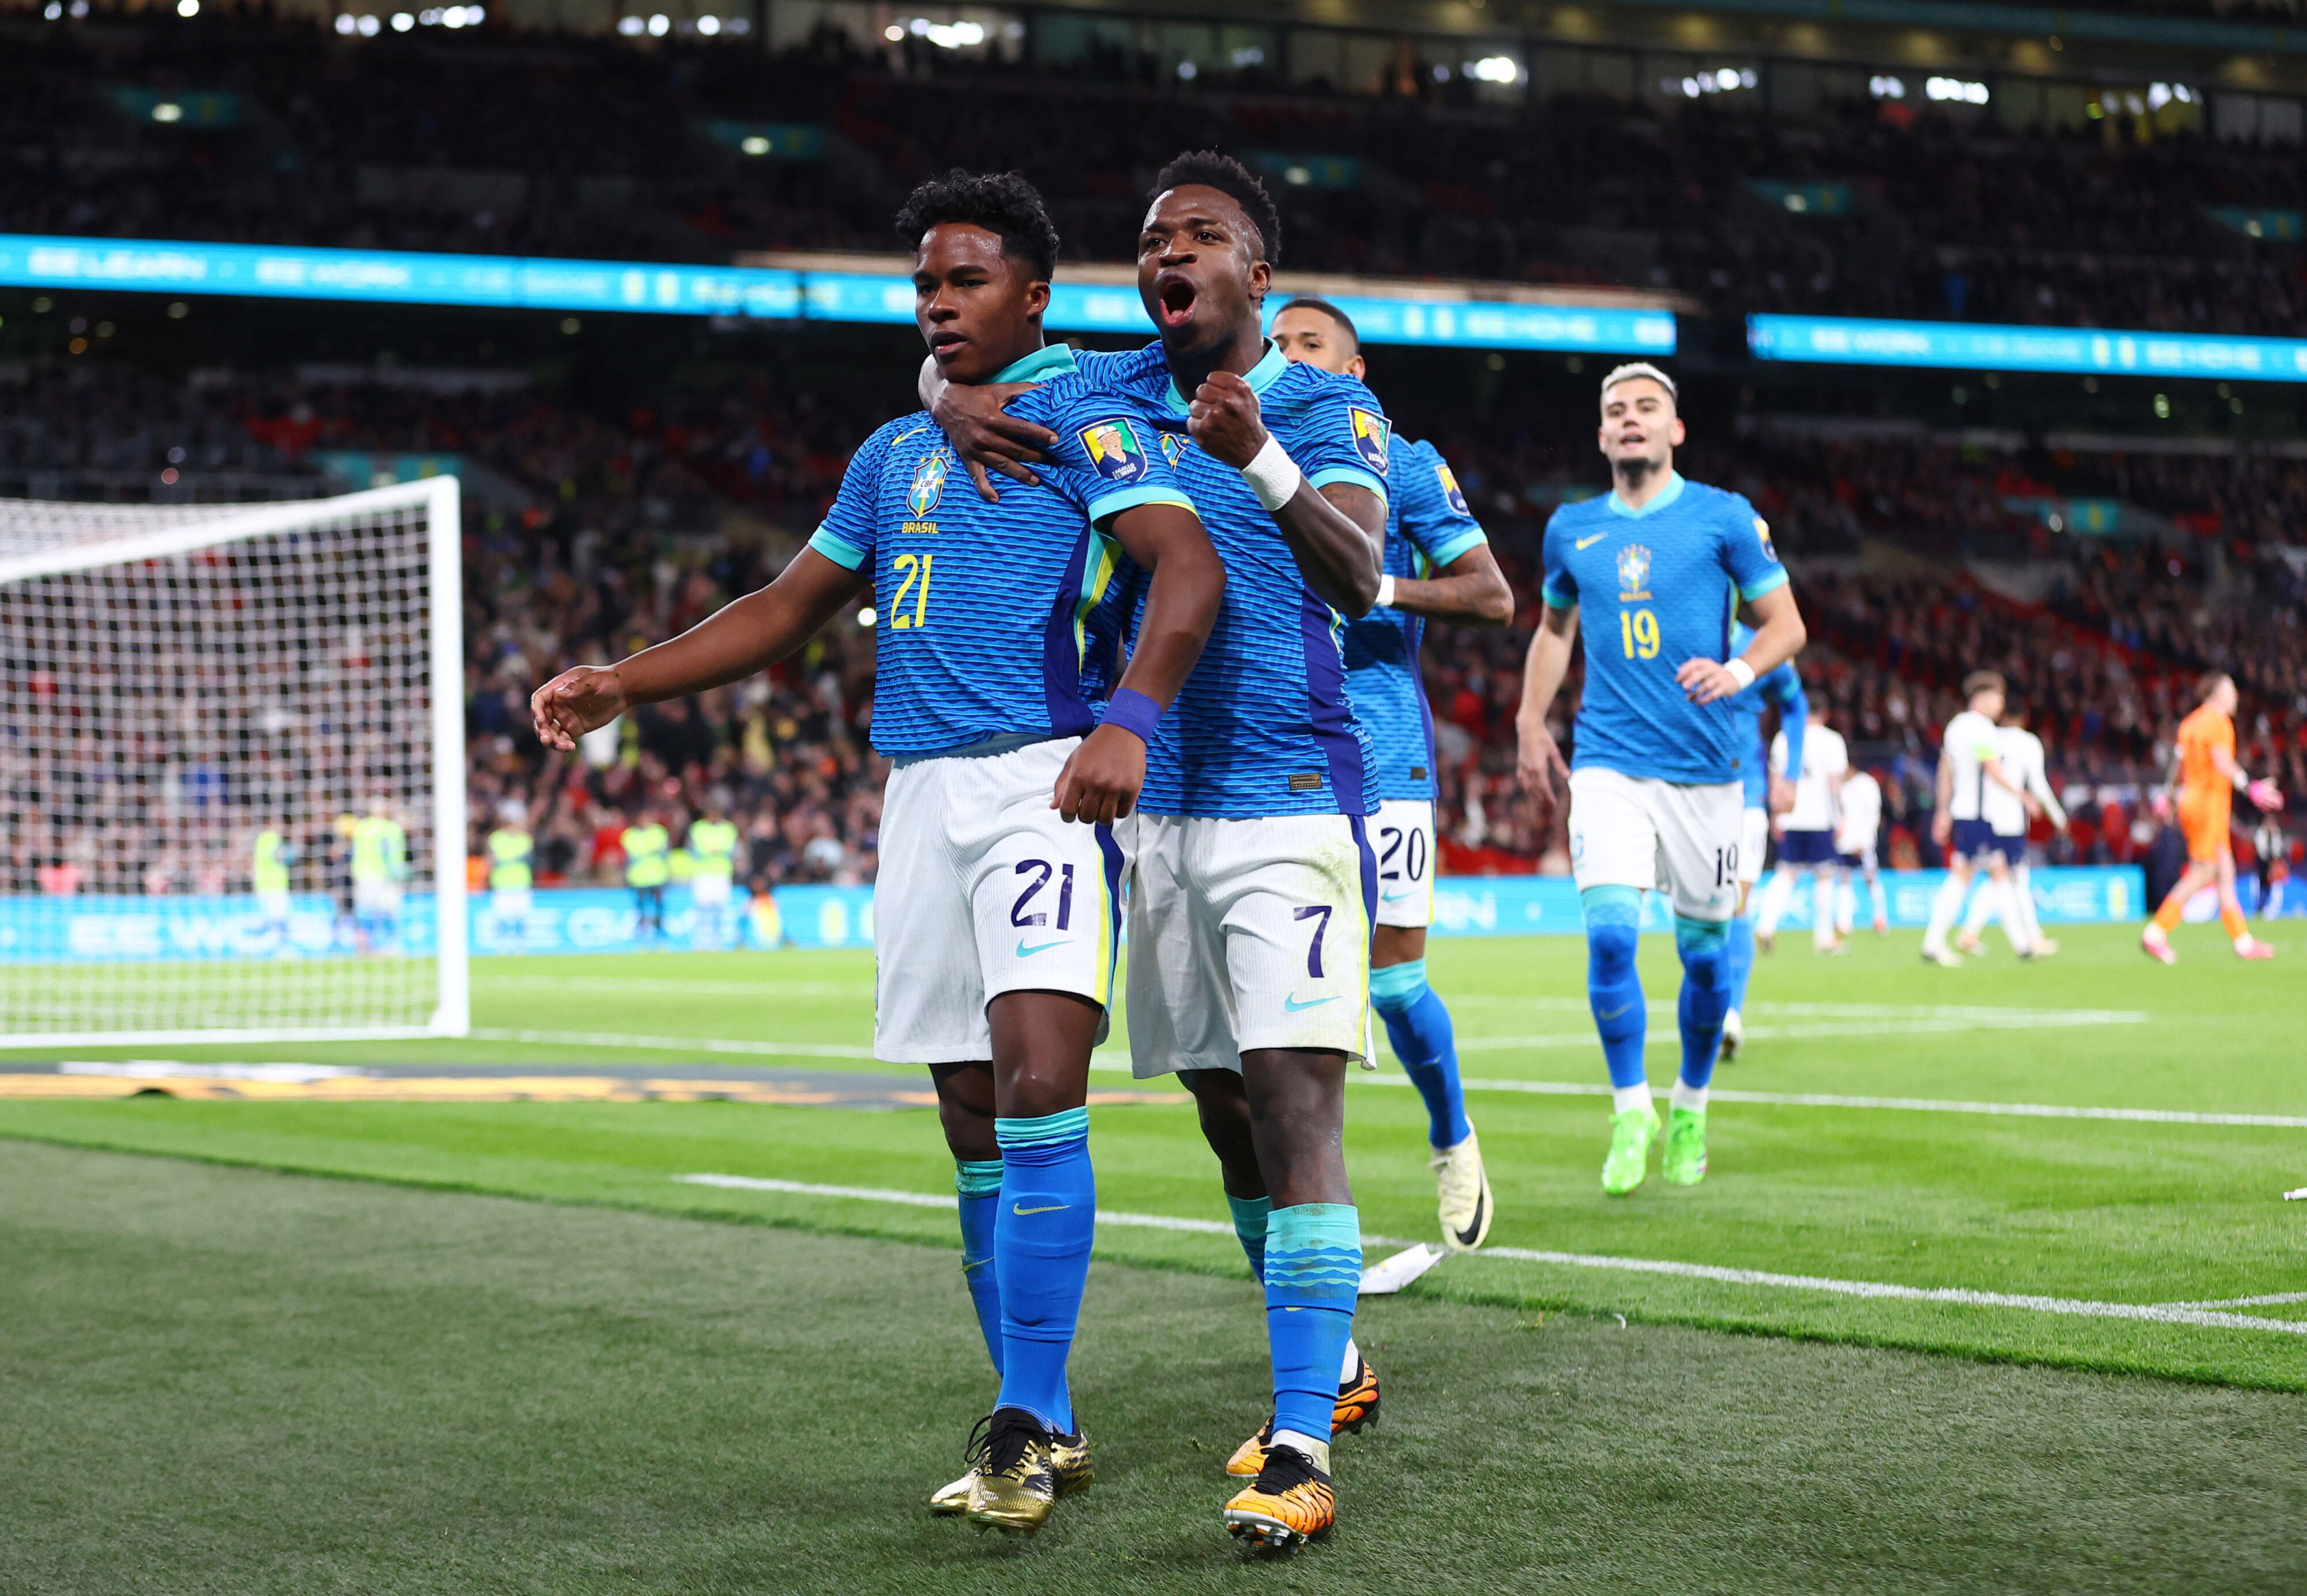 Endrick (21) and Vinicius Jr. (7) during a victory against England